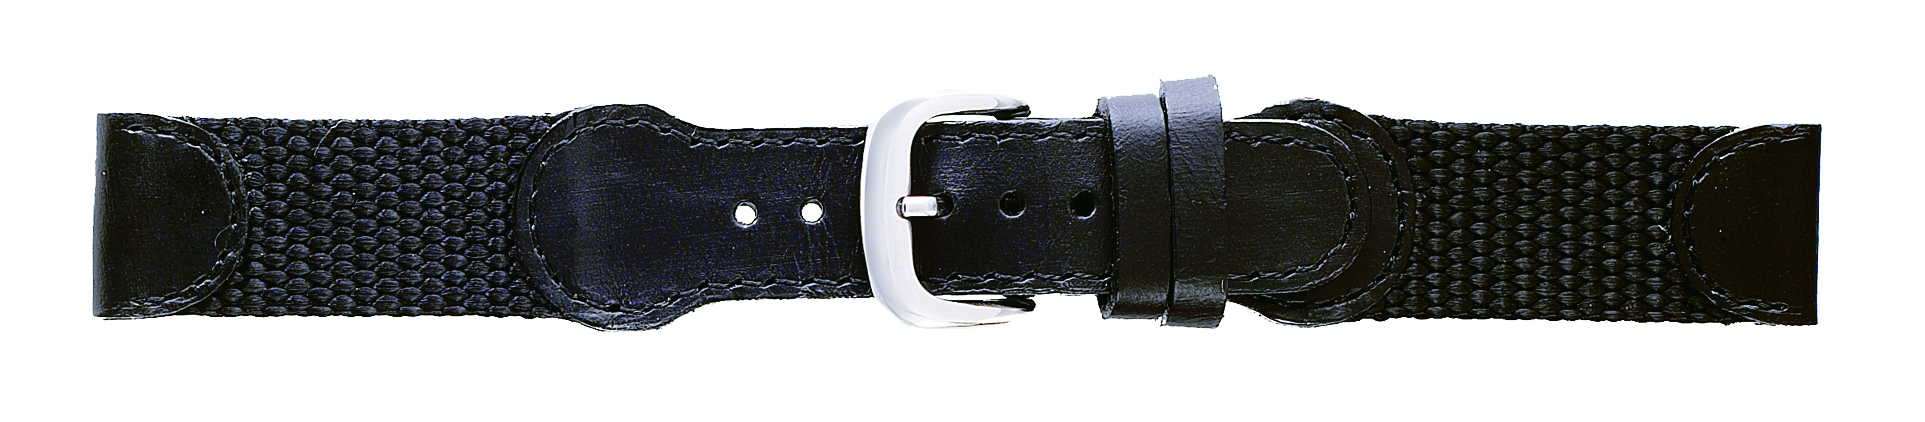 19mm Swiss Army Style Black Leather & Nylon Strap Long-0